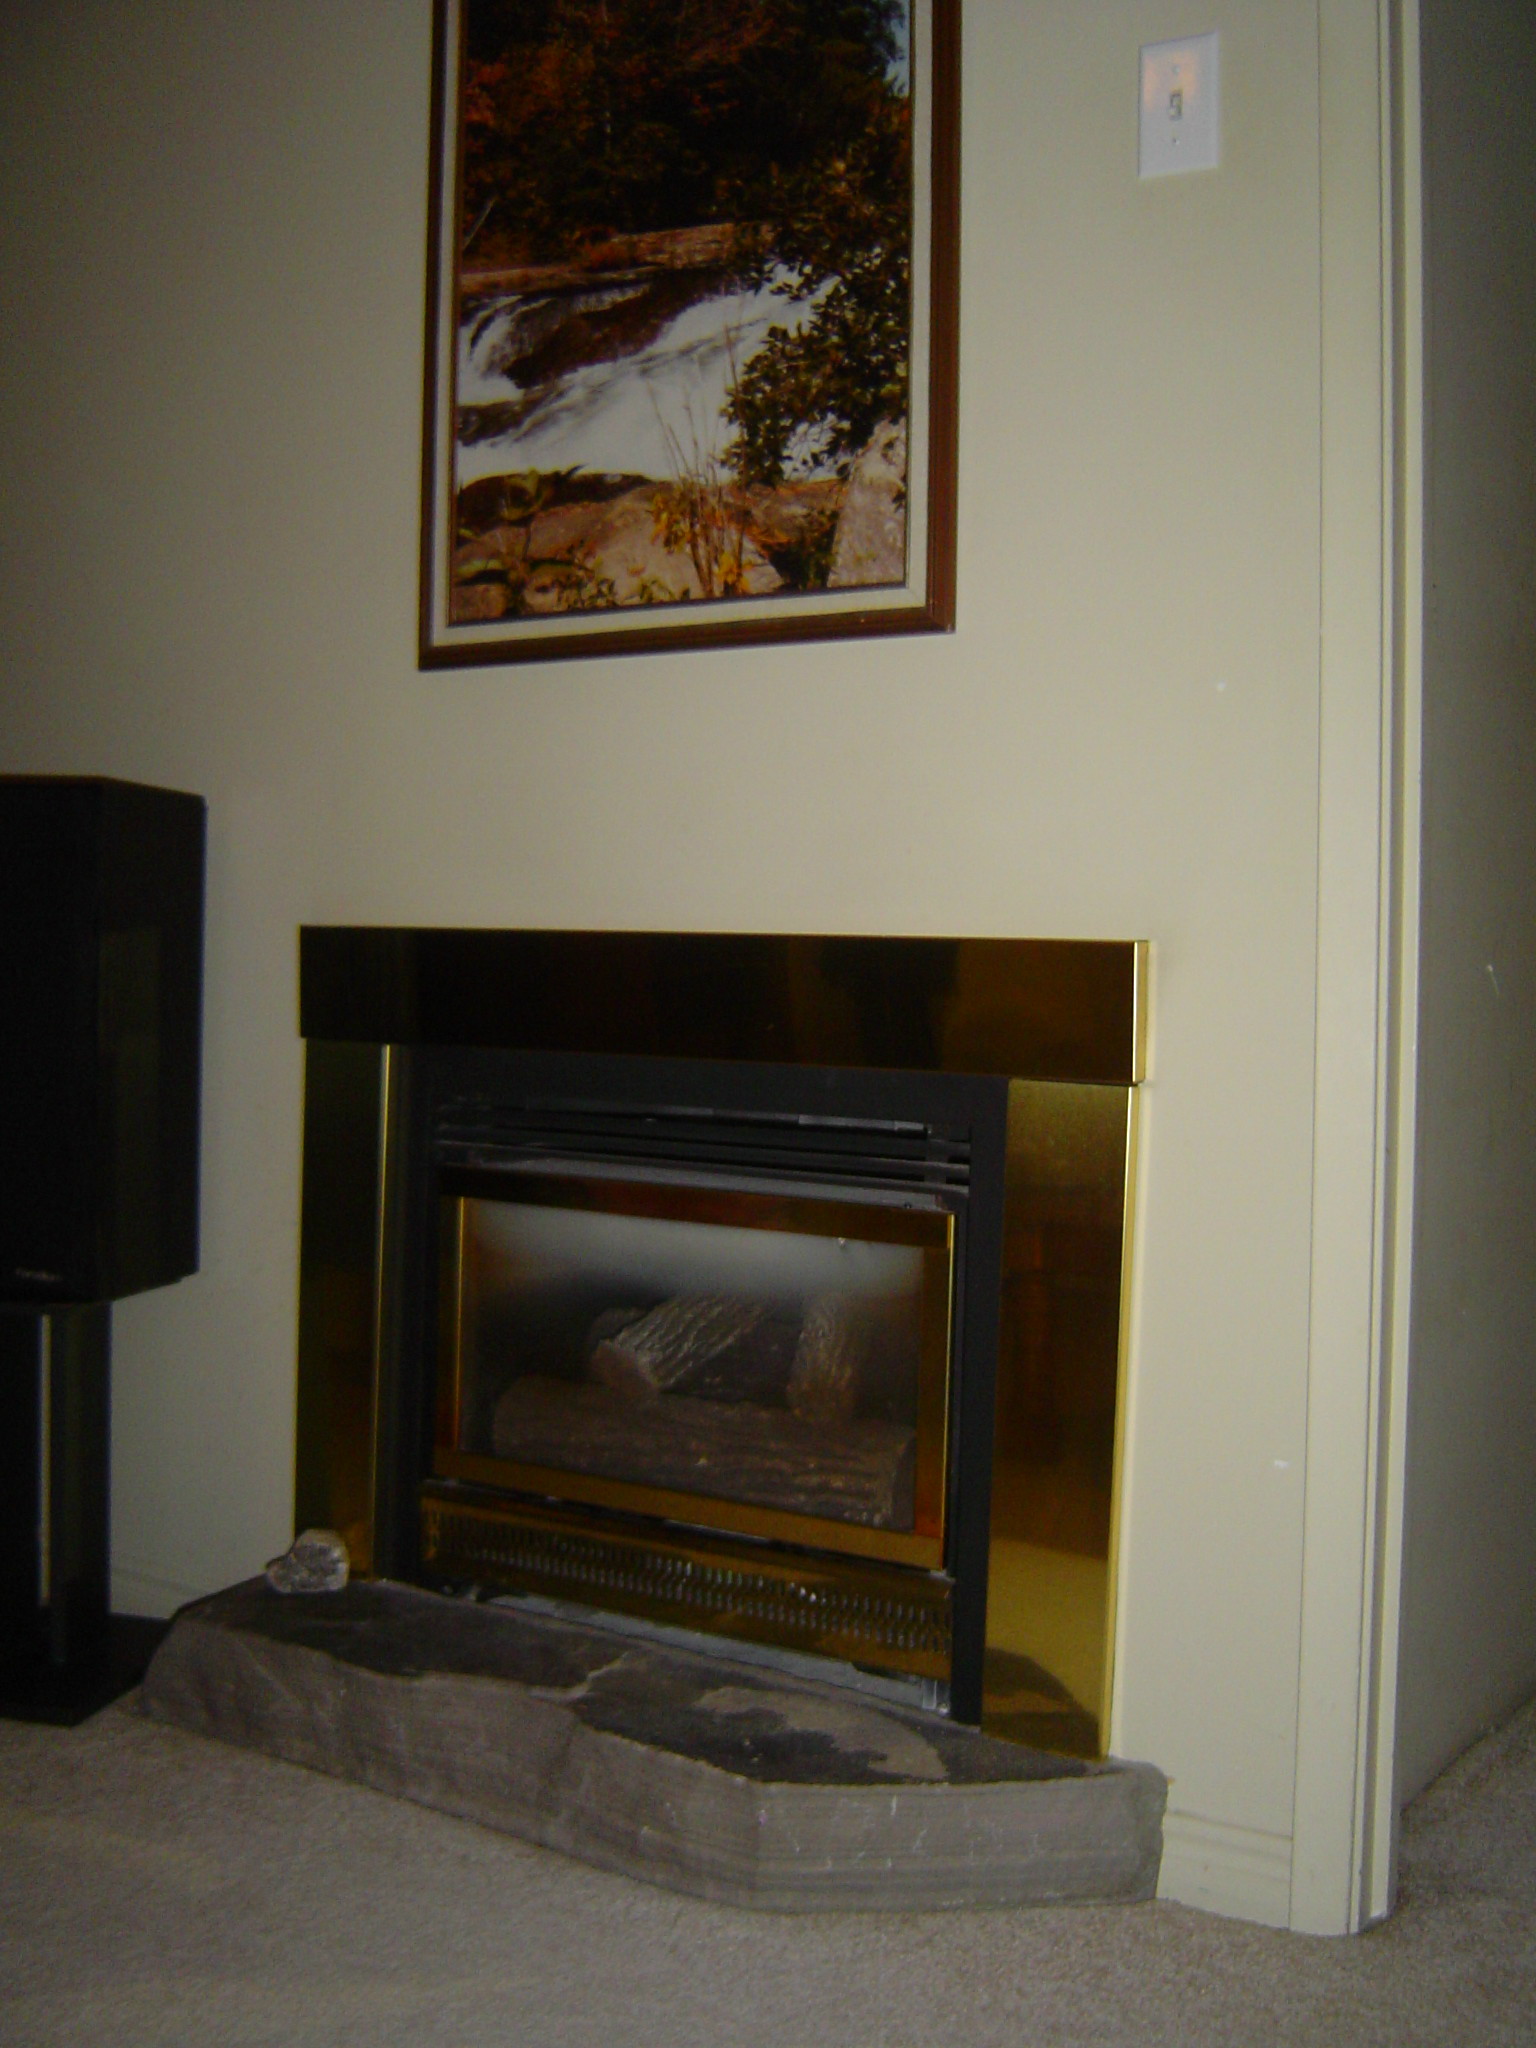 Snuggle up with a good book in front of the gas fireplace